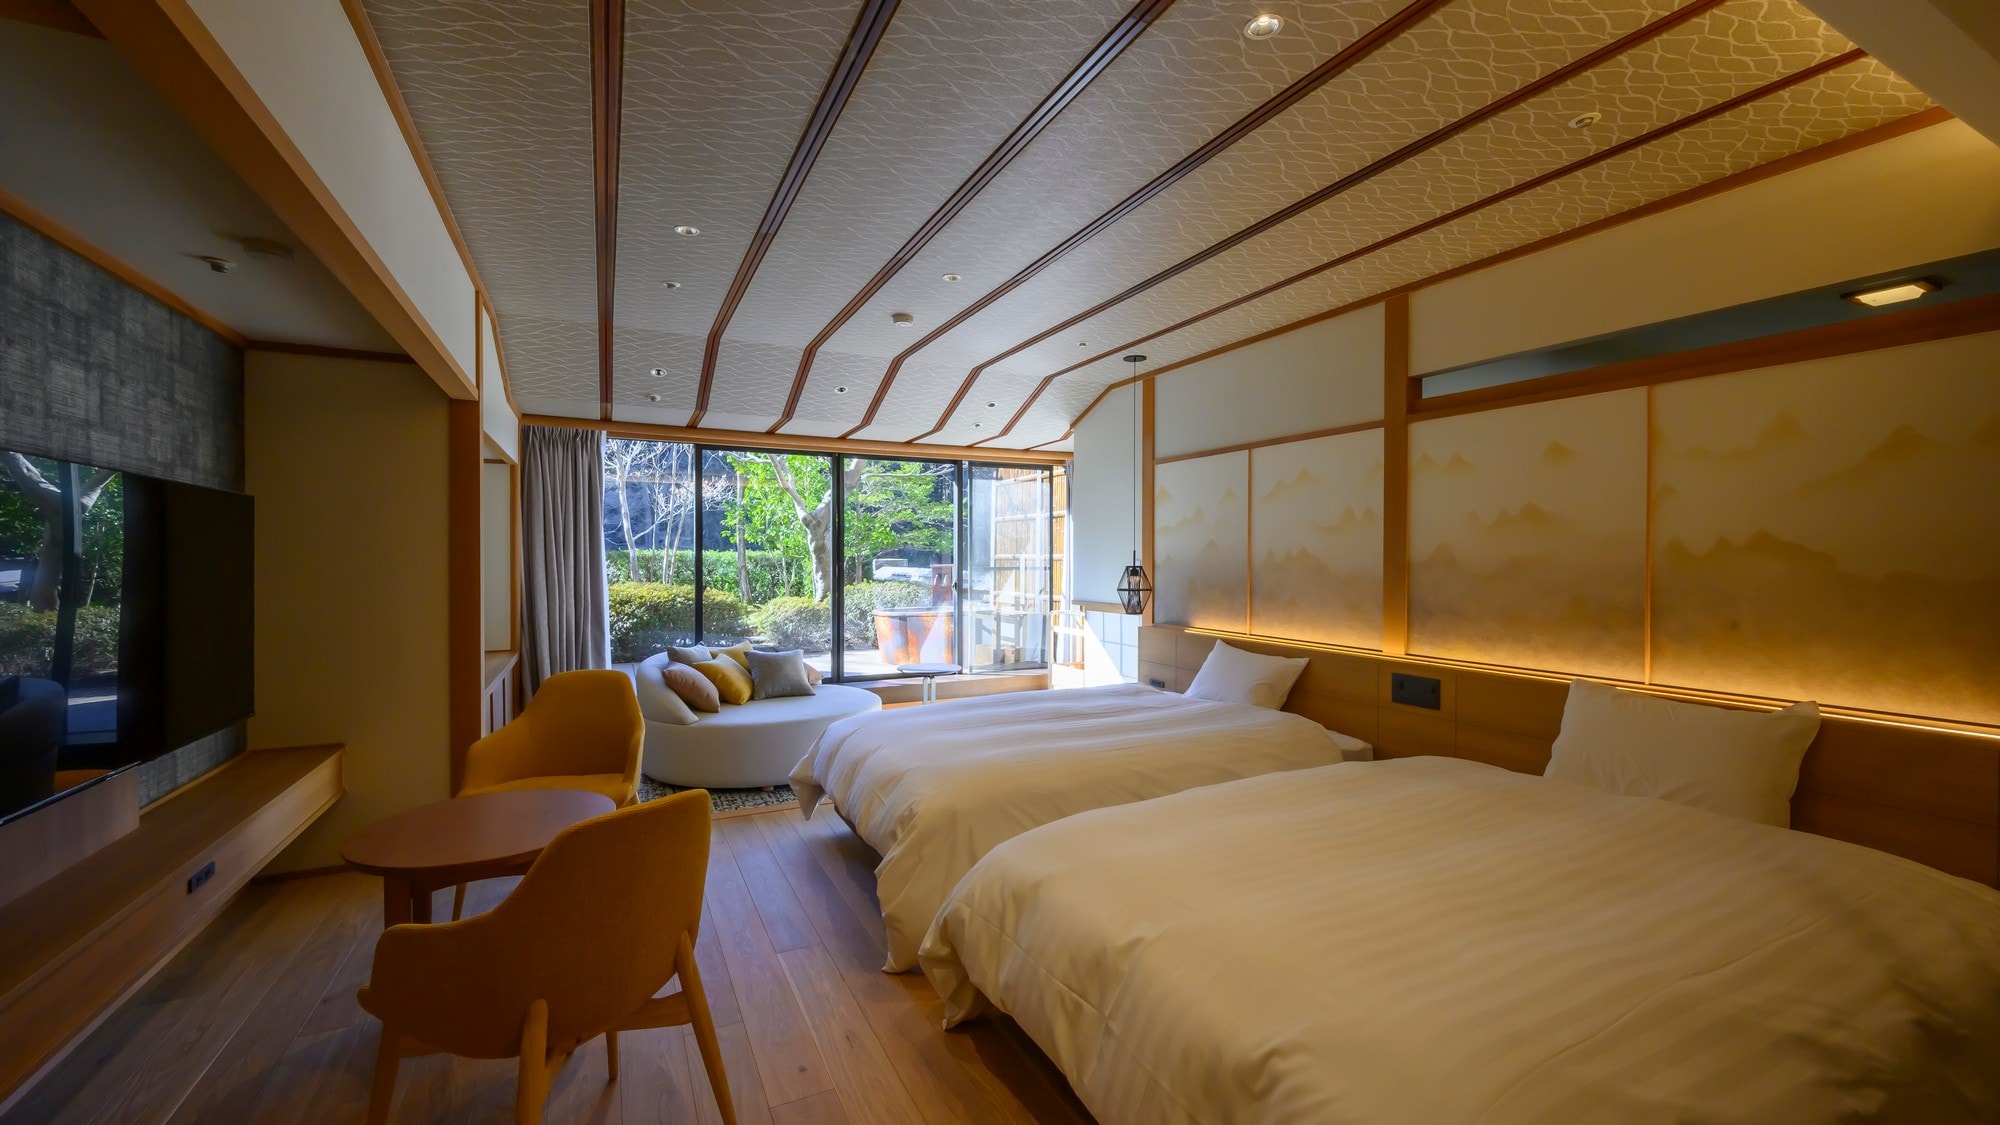 A guest room with an open-air bath on the 4th floor of Manyokan, which was renewed in February 2023. A Japanese-style bed is provided in the flooring room.